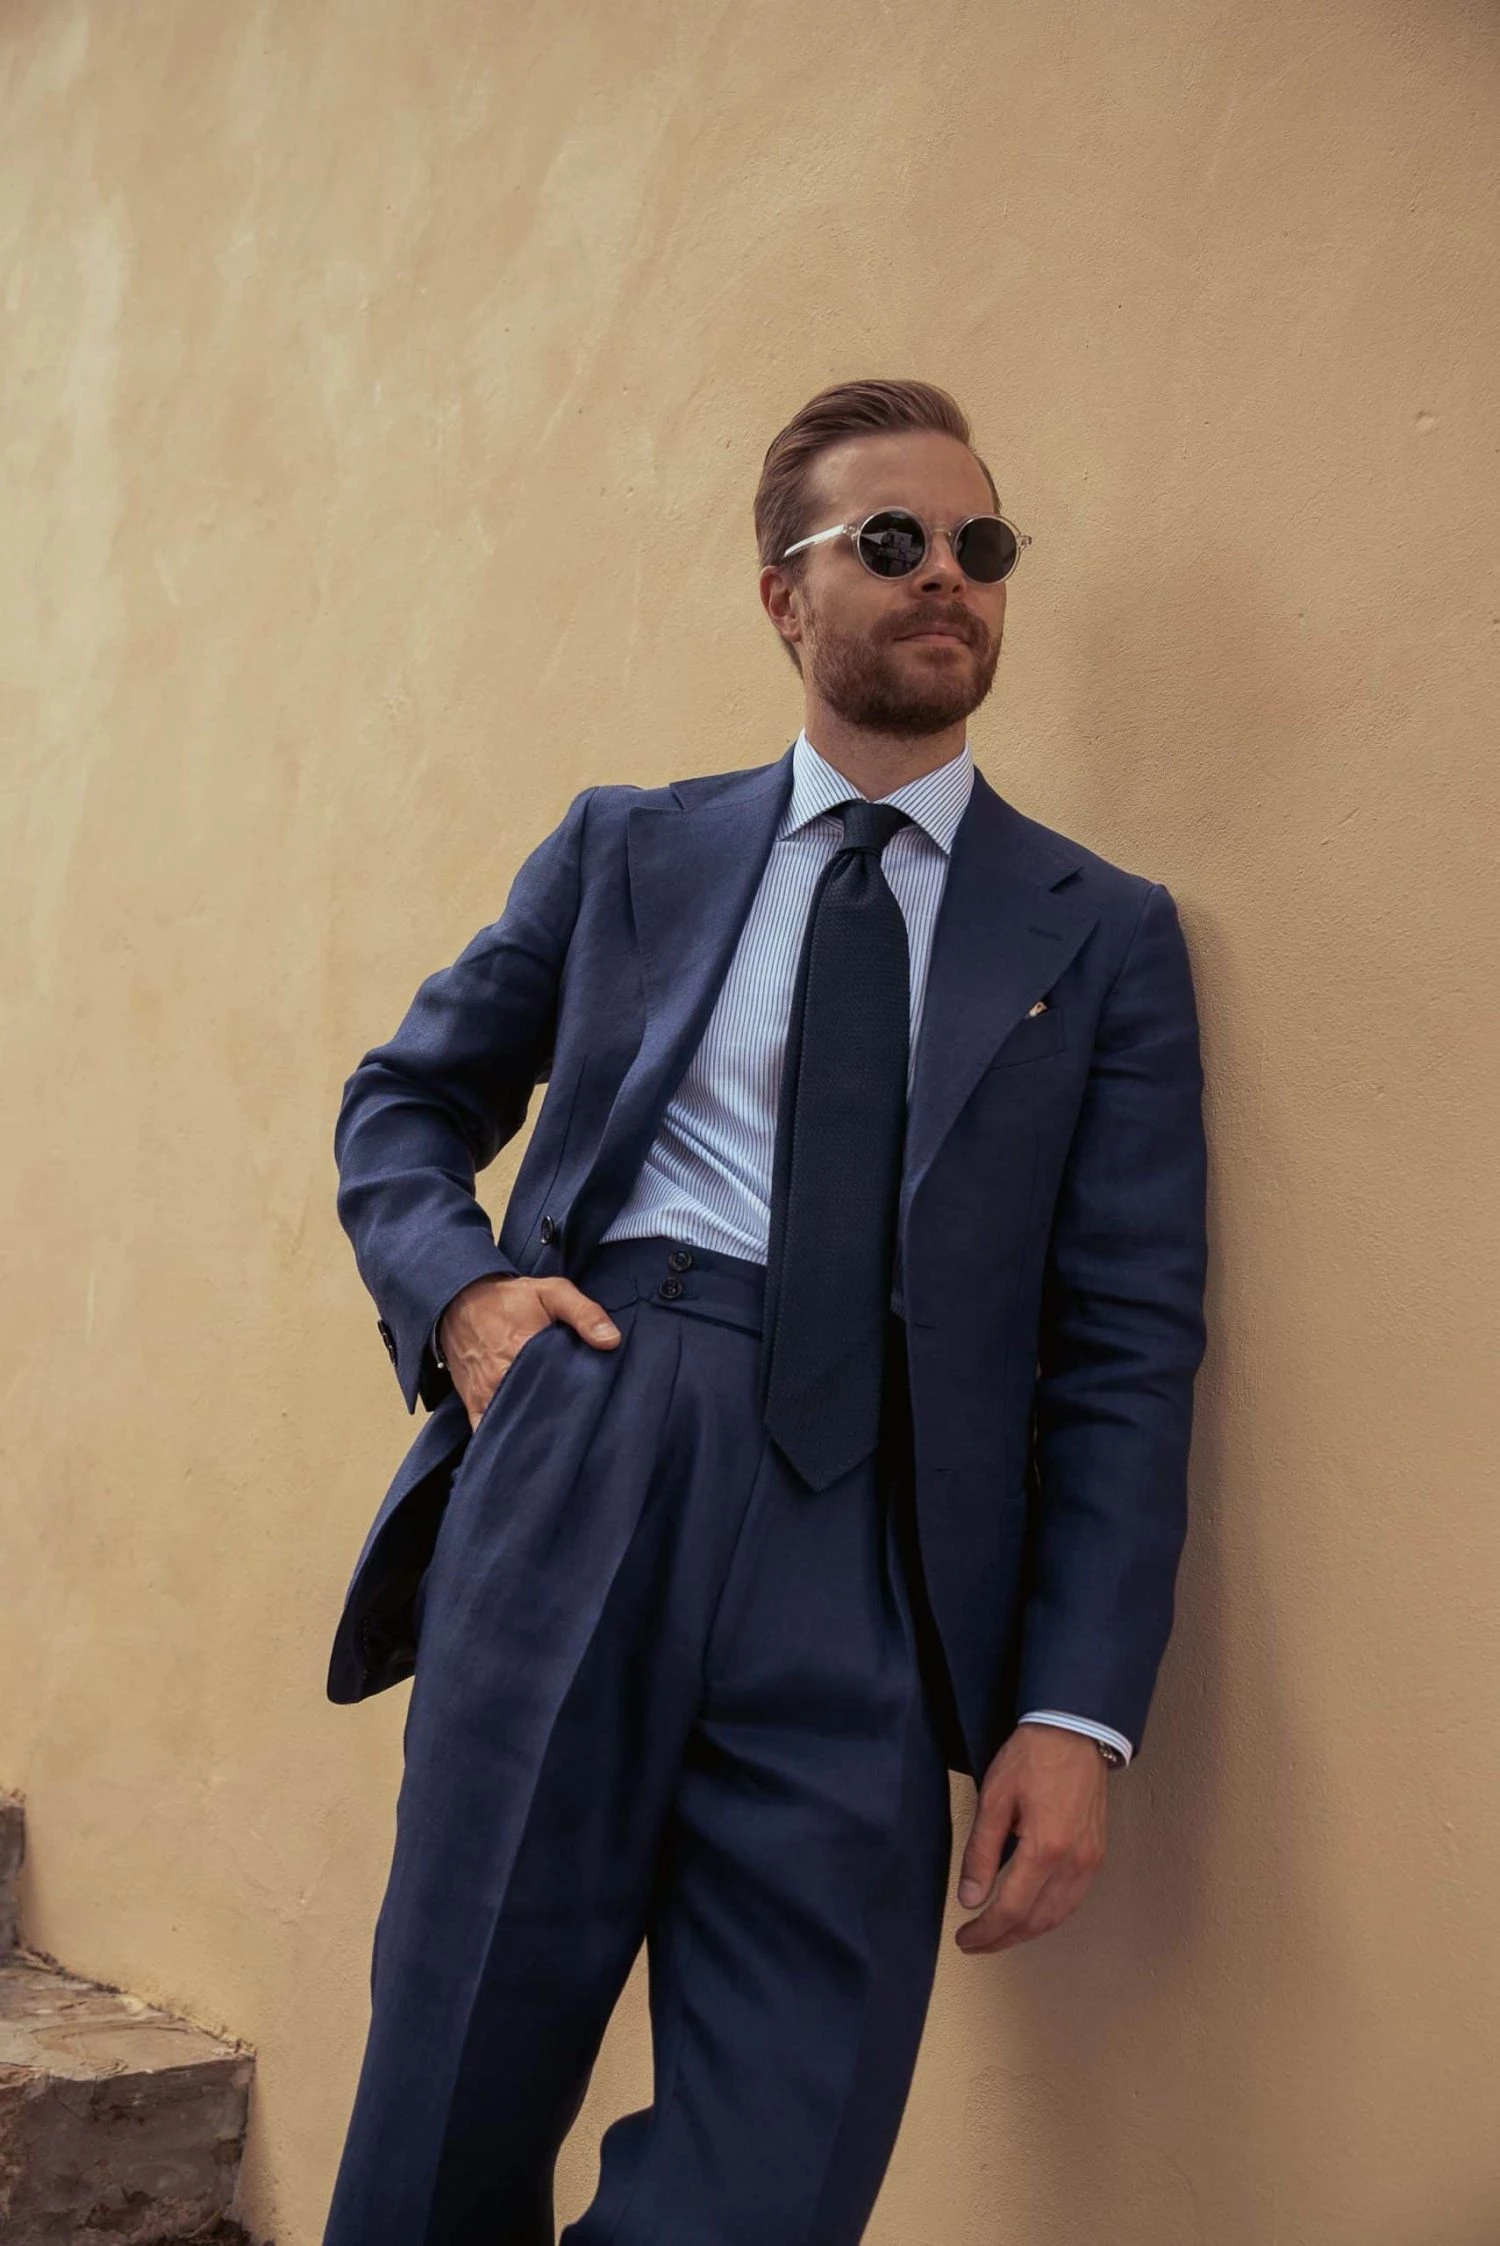 Johan Wikstrøm leaning against a wall, wearing sunglasses and a custom navy blue linen suit at Pitti Uomo